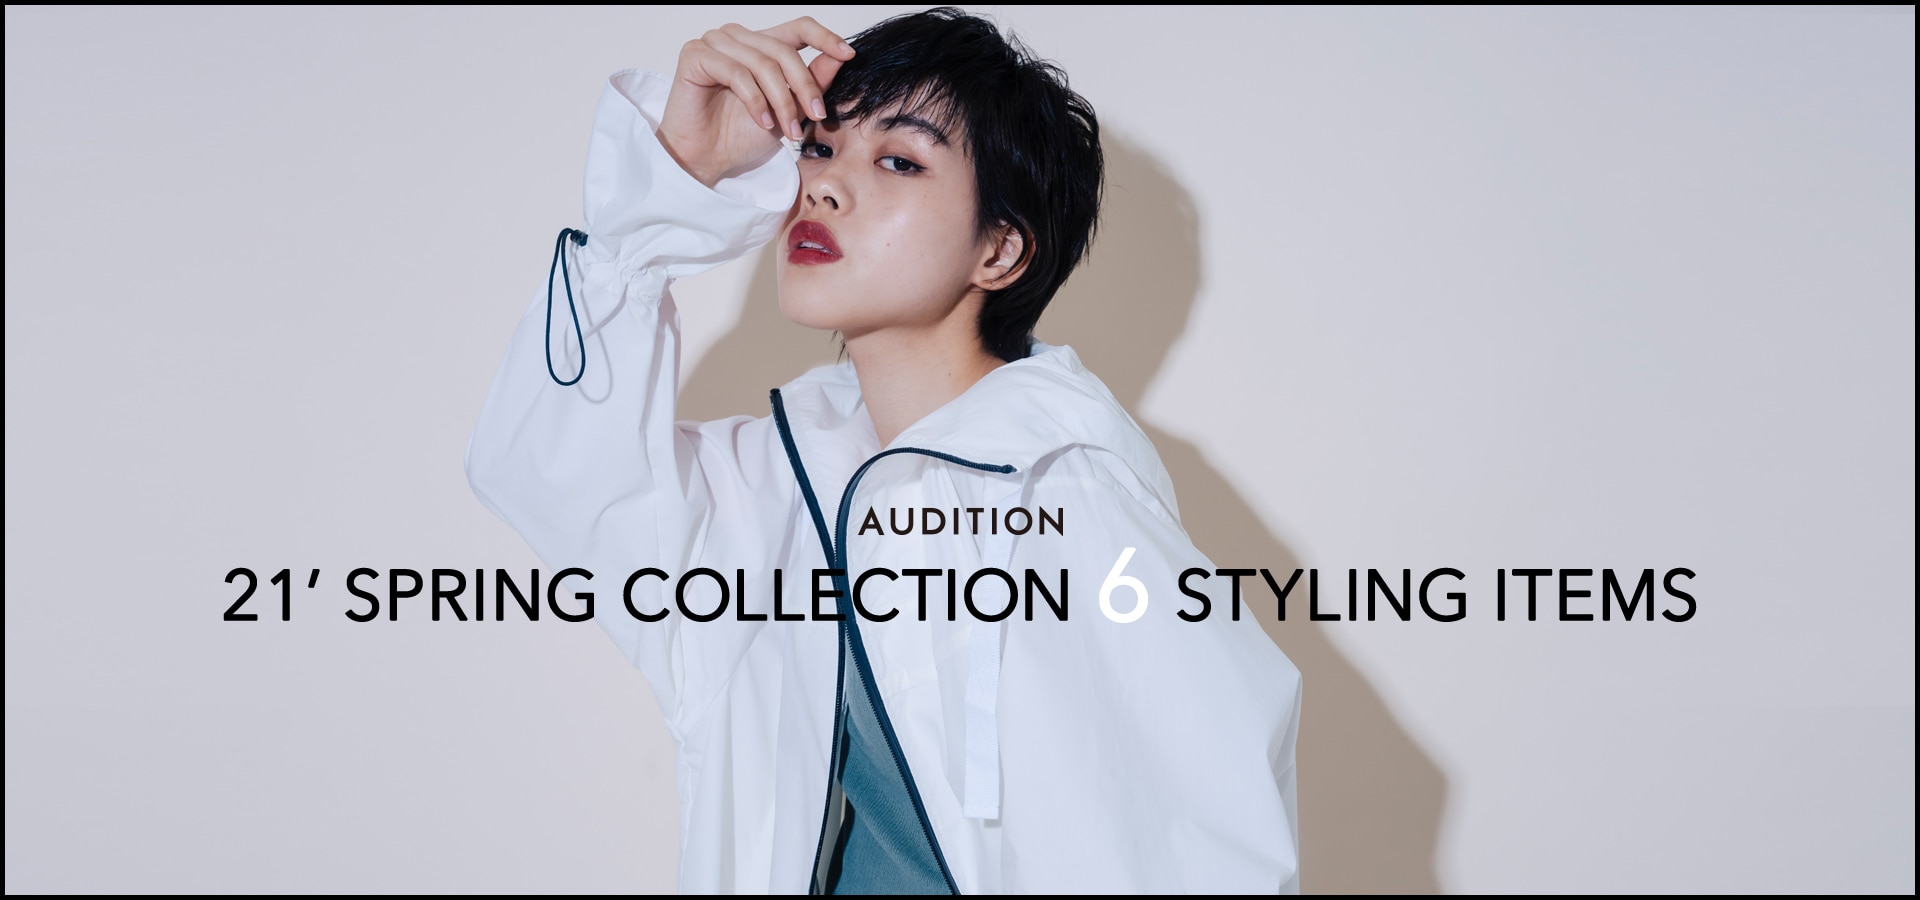 AUDITION 21'SPRING COLLECTION 6STYLING ITEMS ALL